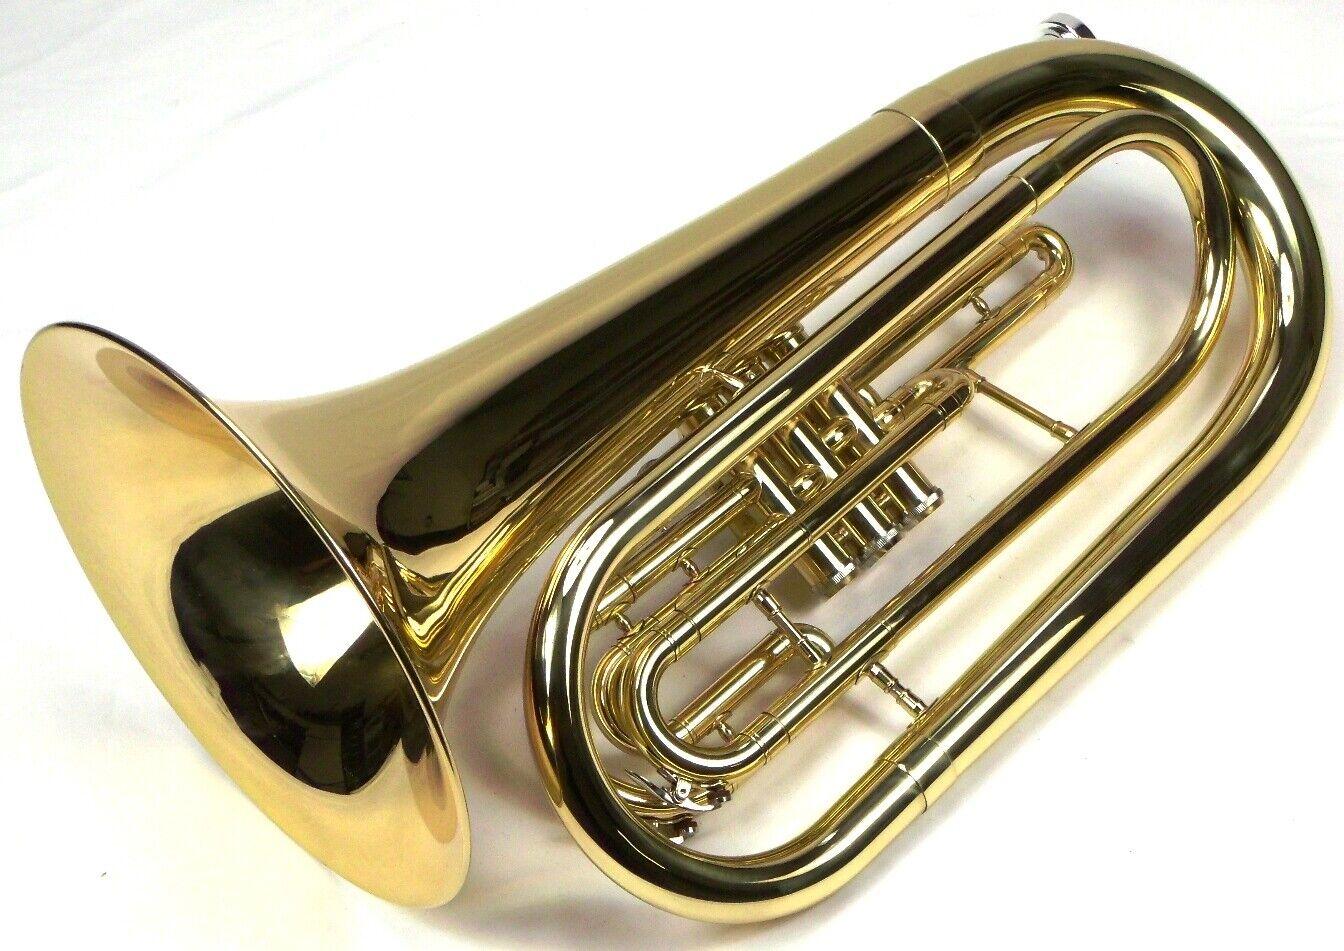 Advanced Monel Pistons Marching Baritone Key of Bb w/ Case Gold Lacquer Finish Moz Does Not Apply - фотография #6